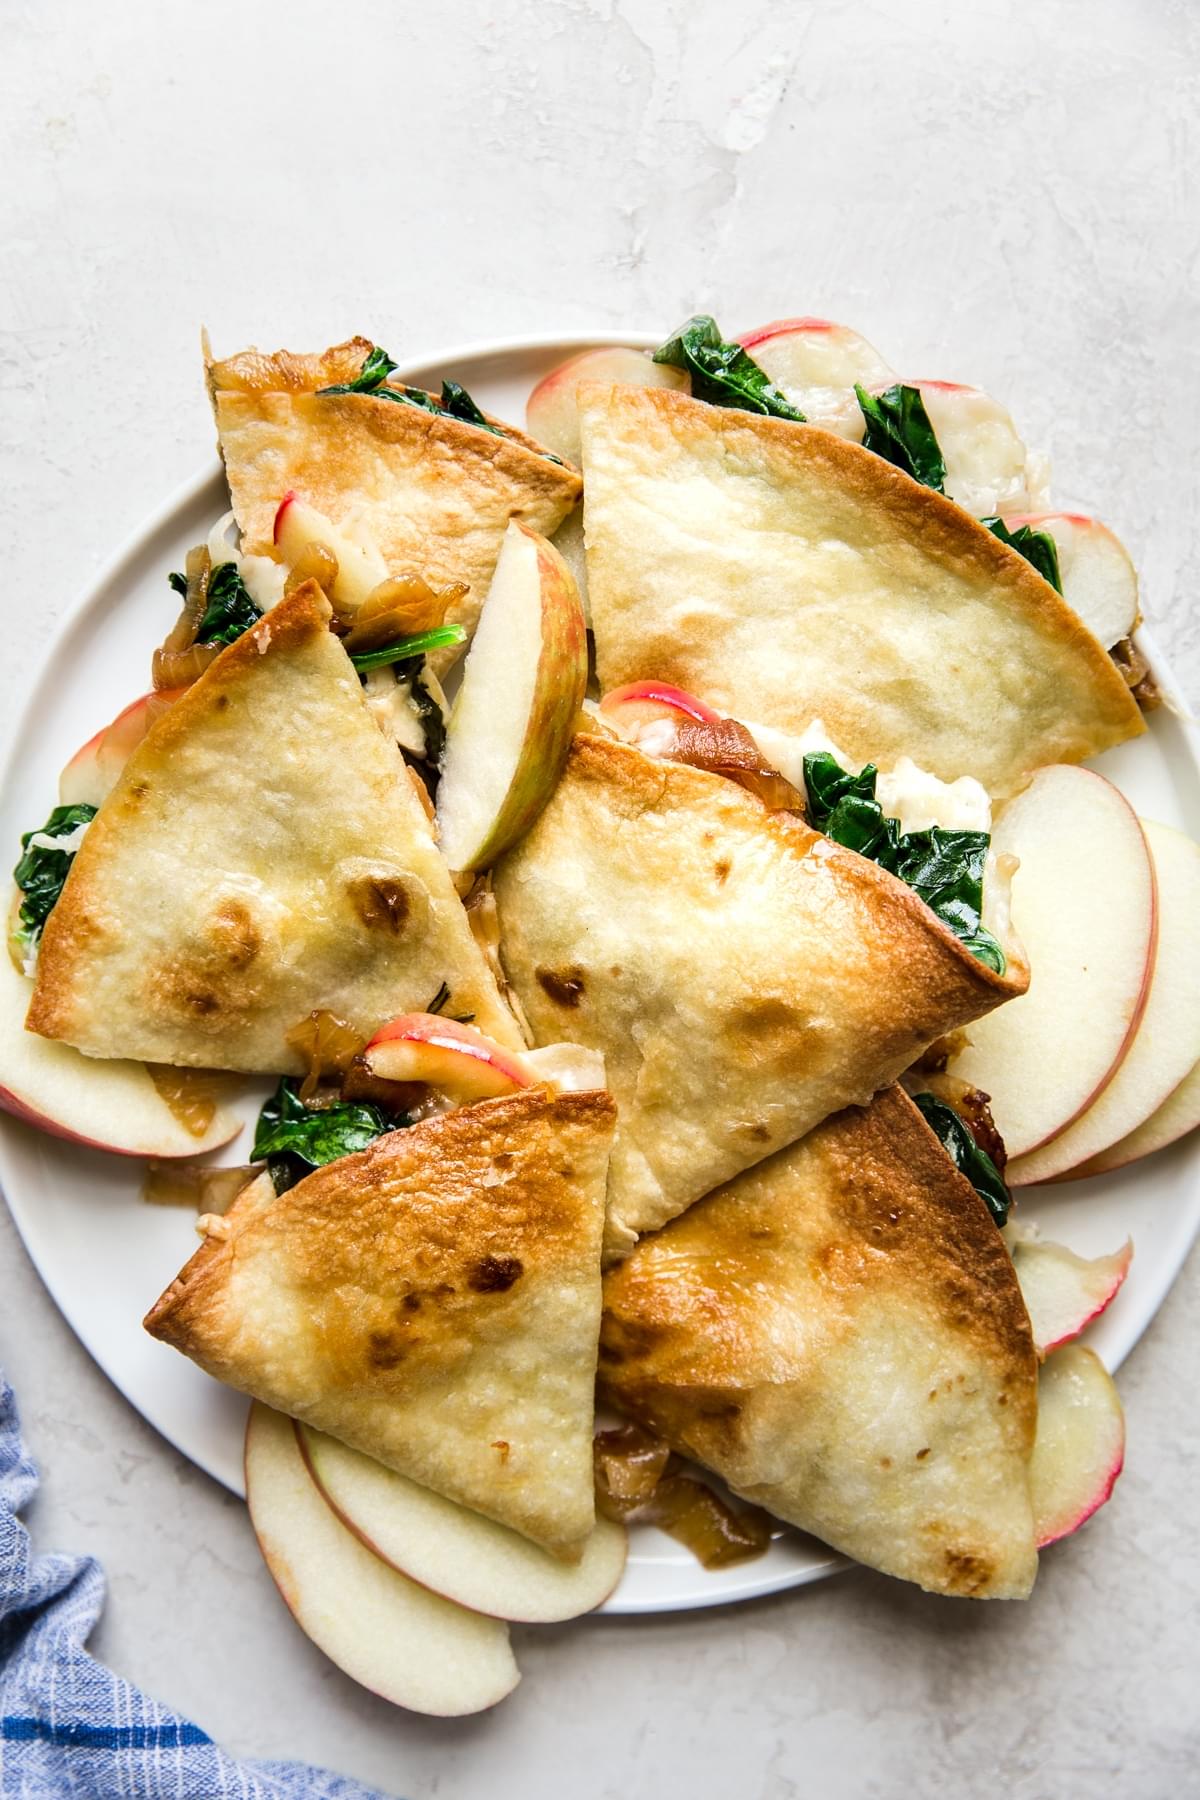 Apple, Caramelized Onion and spinach Baked Quesadillas on a plate